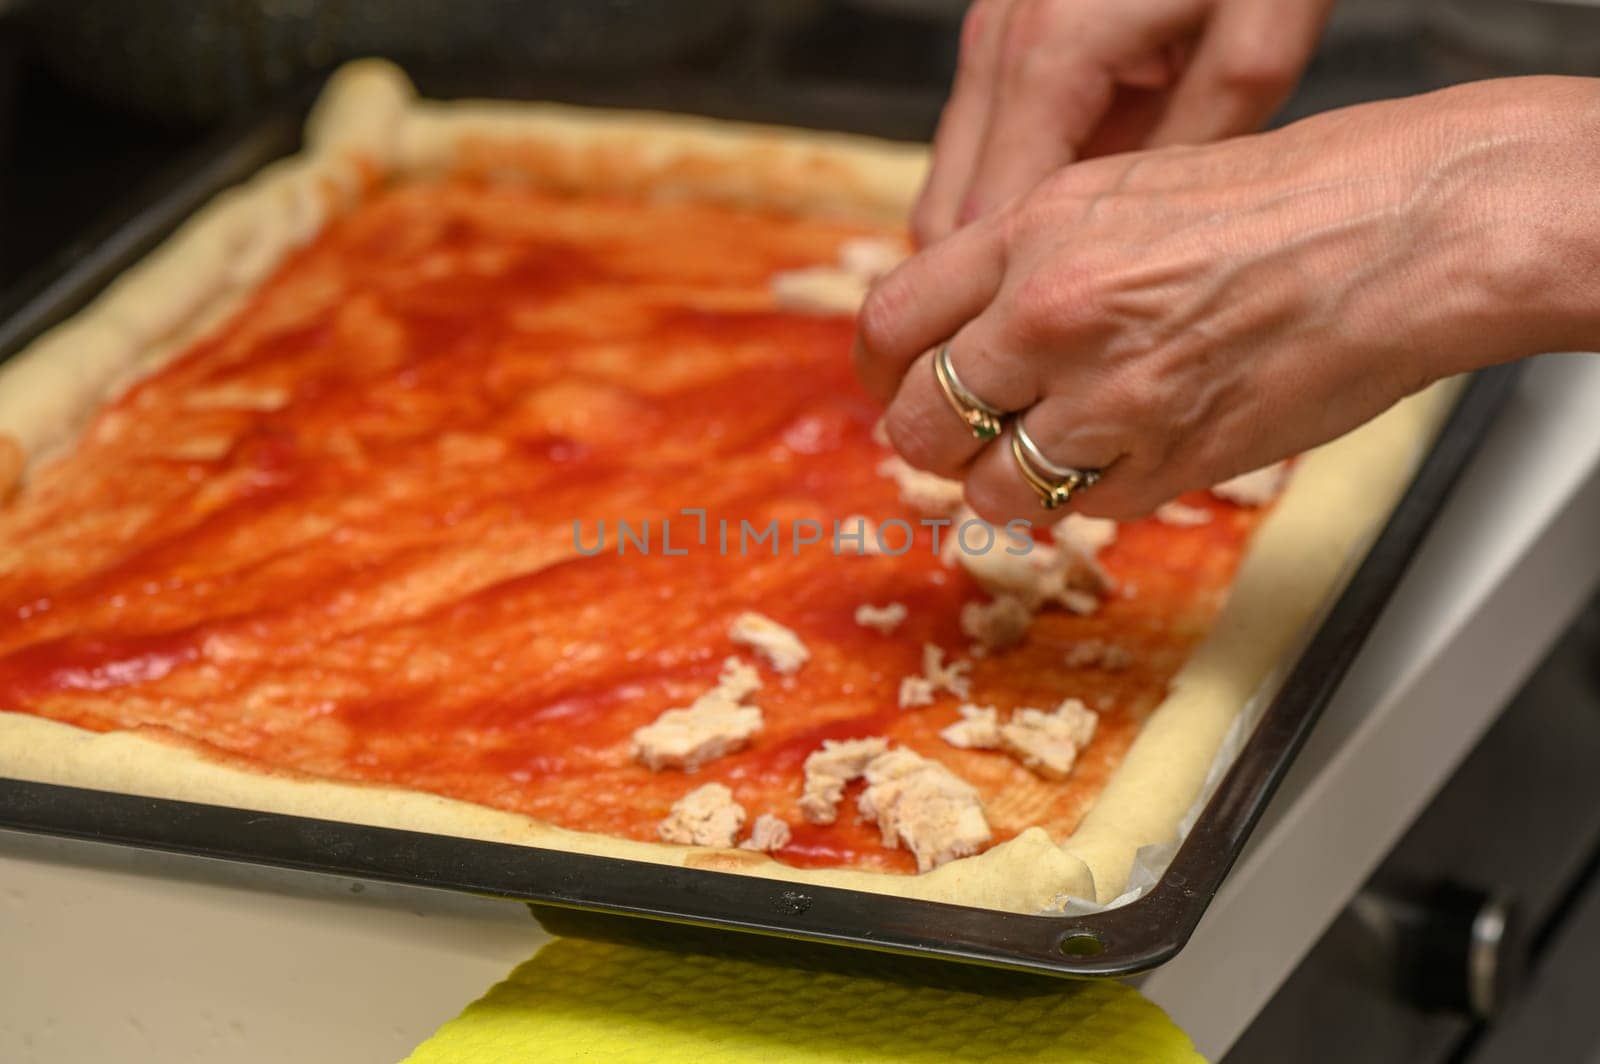 woman putting meat on pizza in the kitchen 3 by Mixa74